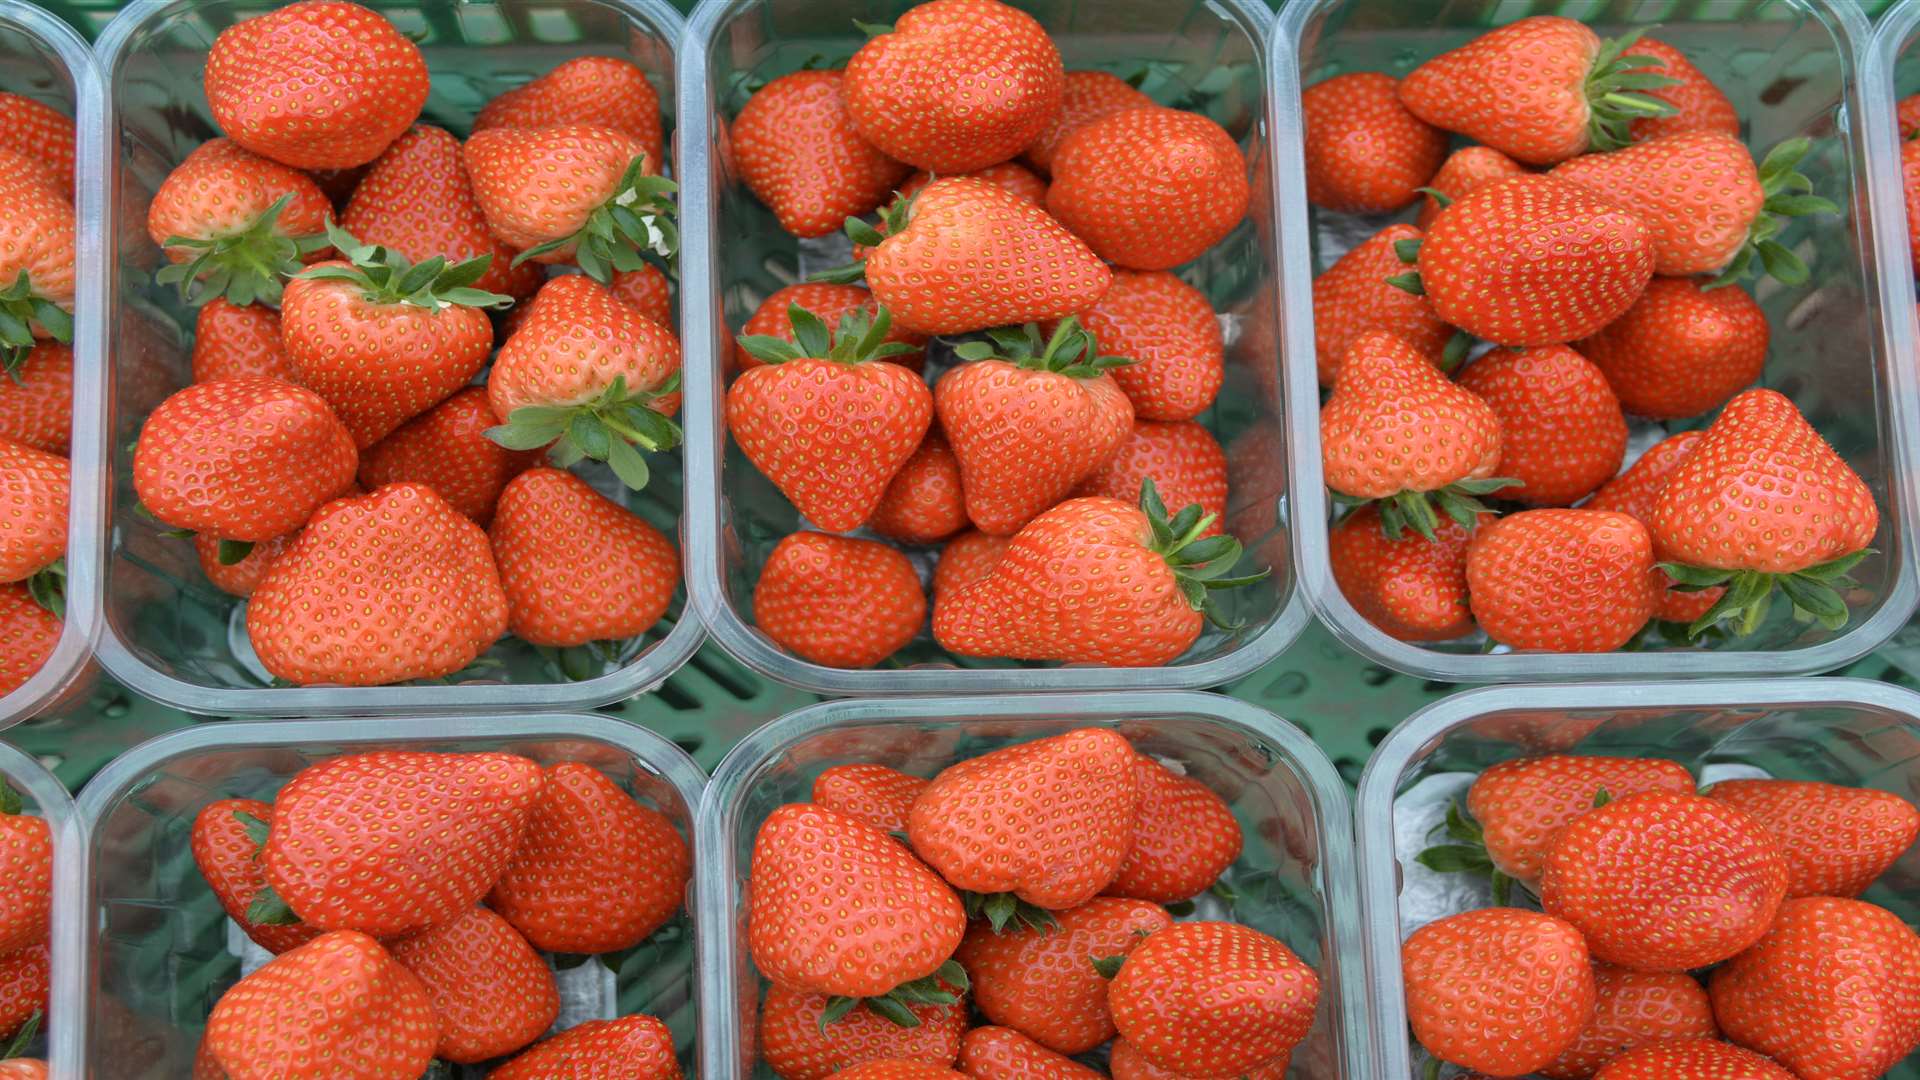 Strawberries covered in poisonous chemicals were stolen from a farm in Ulcombe. Stock image